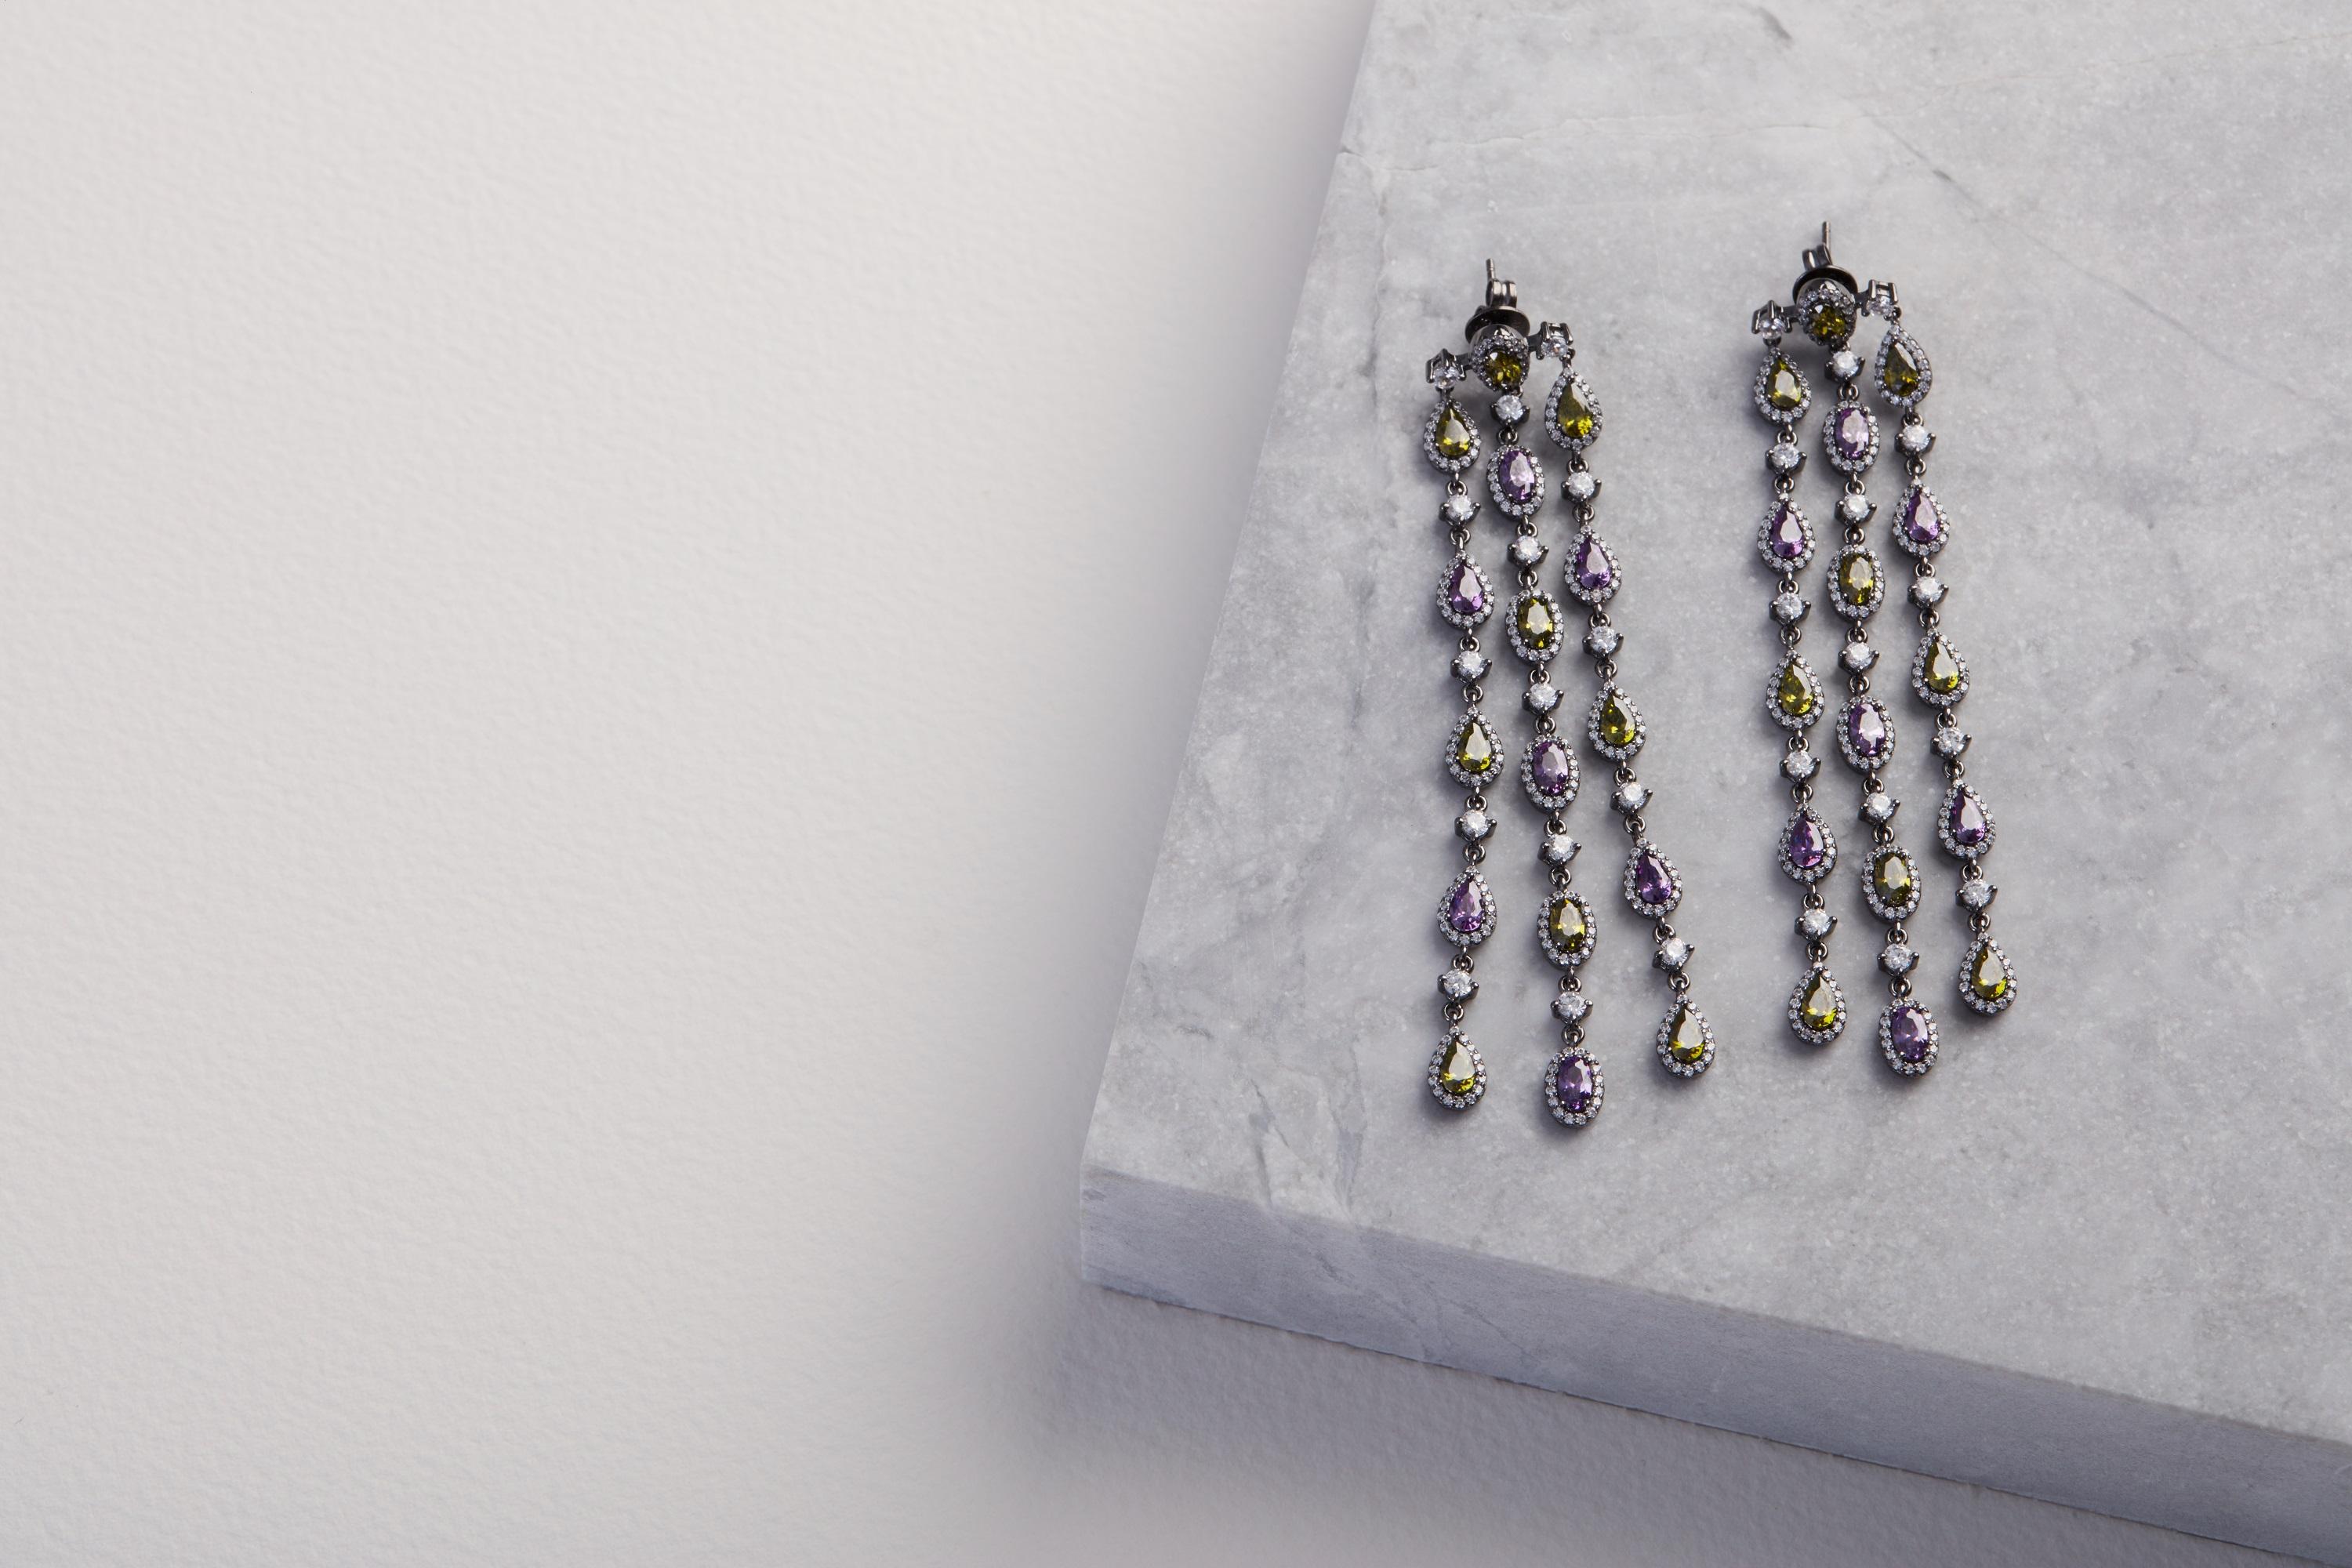 A dazzling dripping gems. Platinum and Black rhodium plated sterling silver with hand hand set with beautiful amethyst, peridot and clear zircon. A game changer for any outfit!  11 cm in length